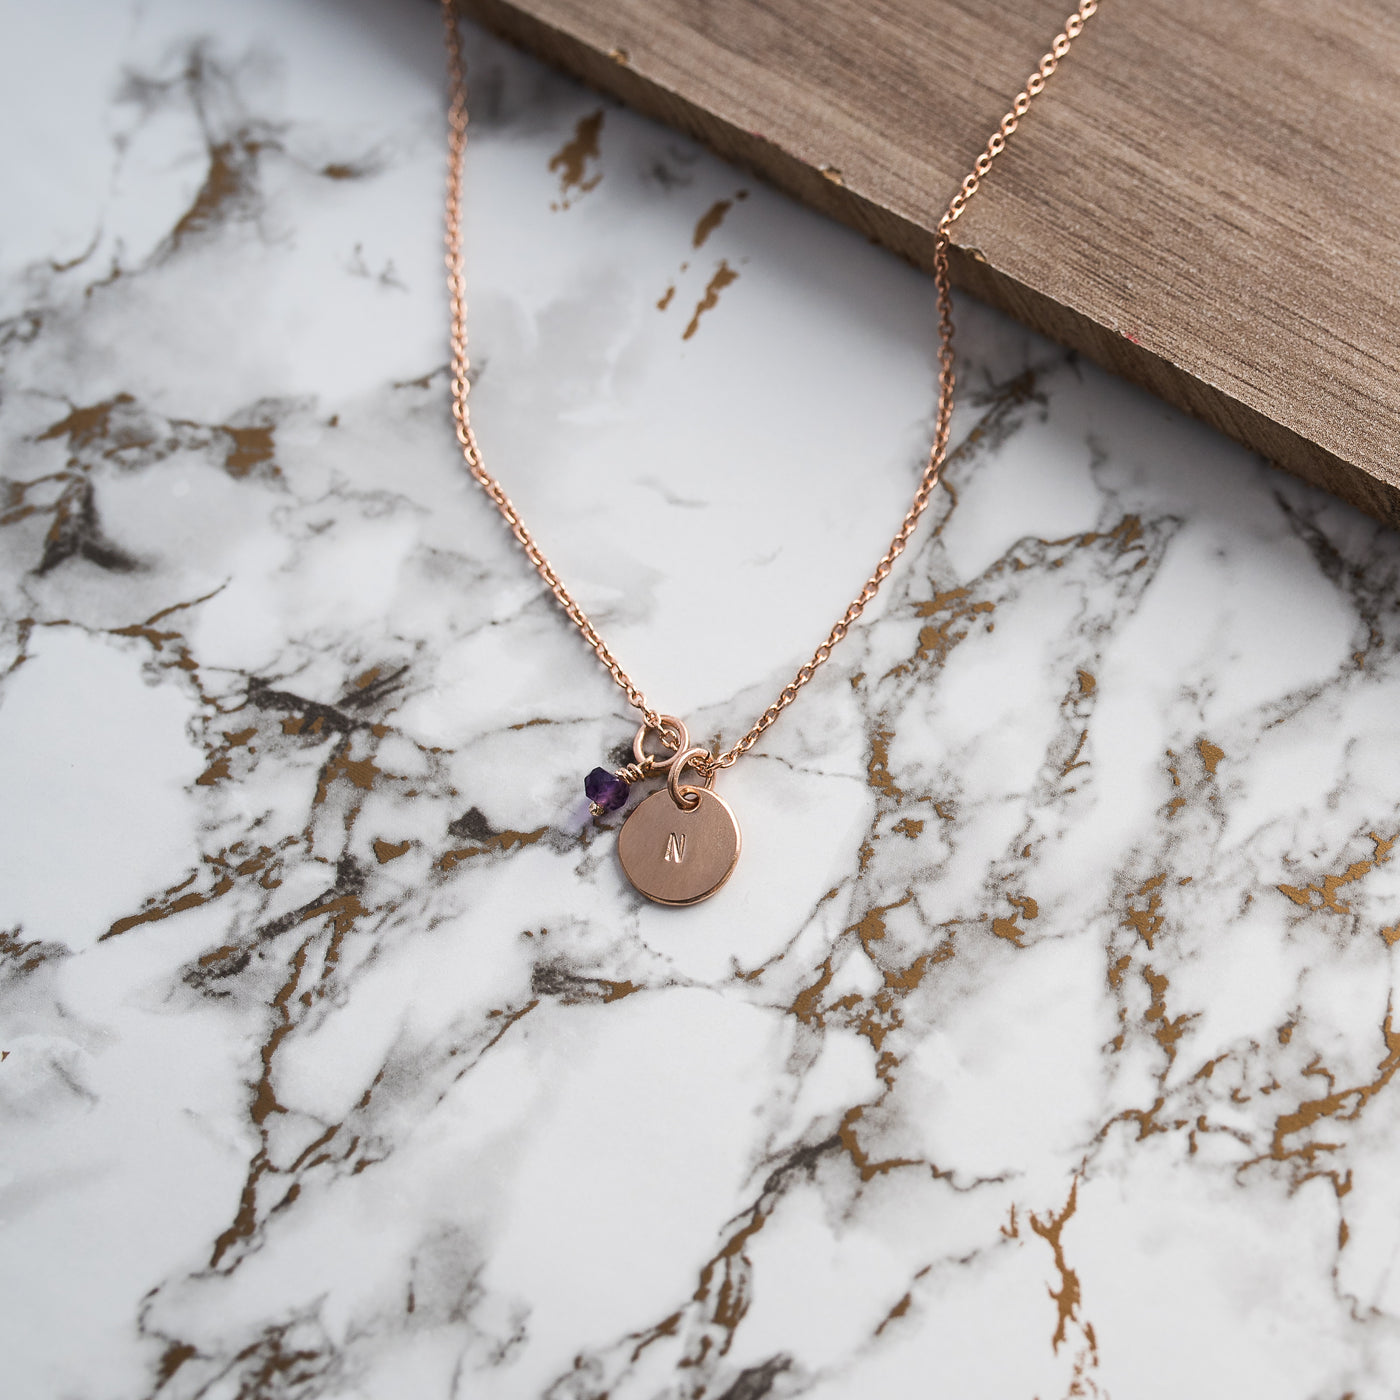 9ct Rose Gold Initial Disc Pendant, Pendant/Necklace - Kirsty Taylor Goldsmiths